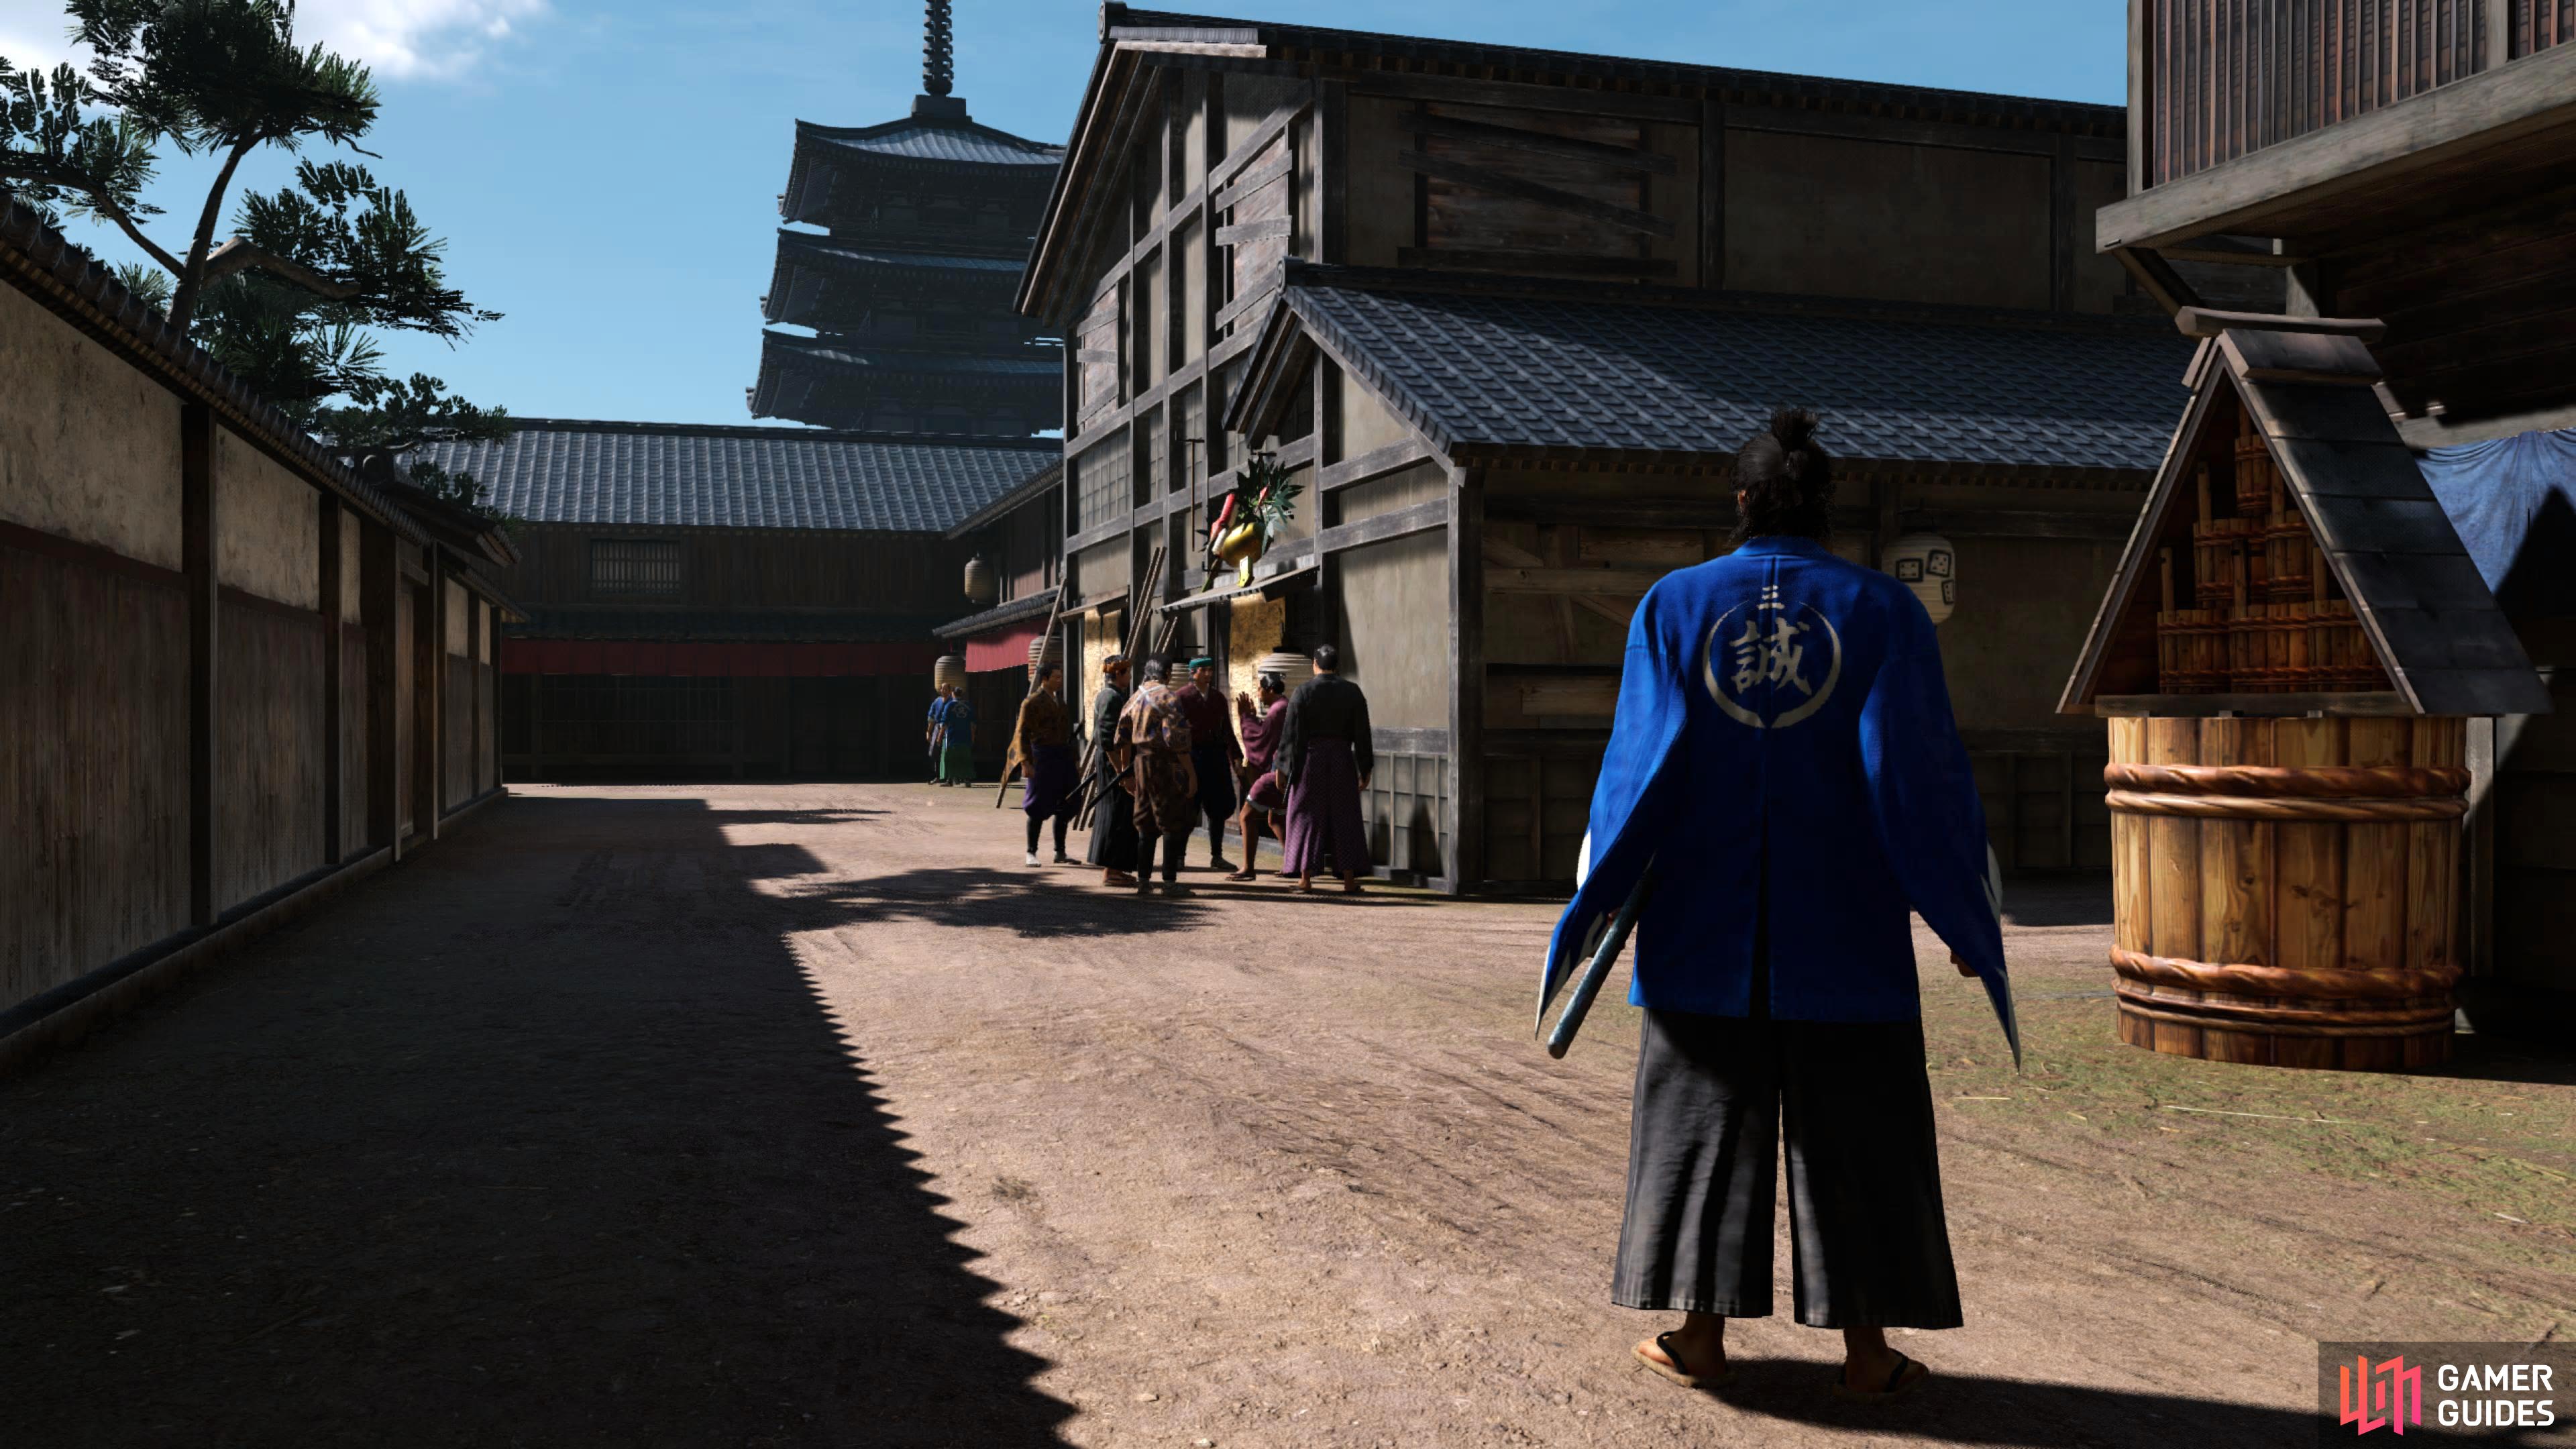 Something's happening outside the Gambler's Den in Rakugai, what could be going on?